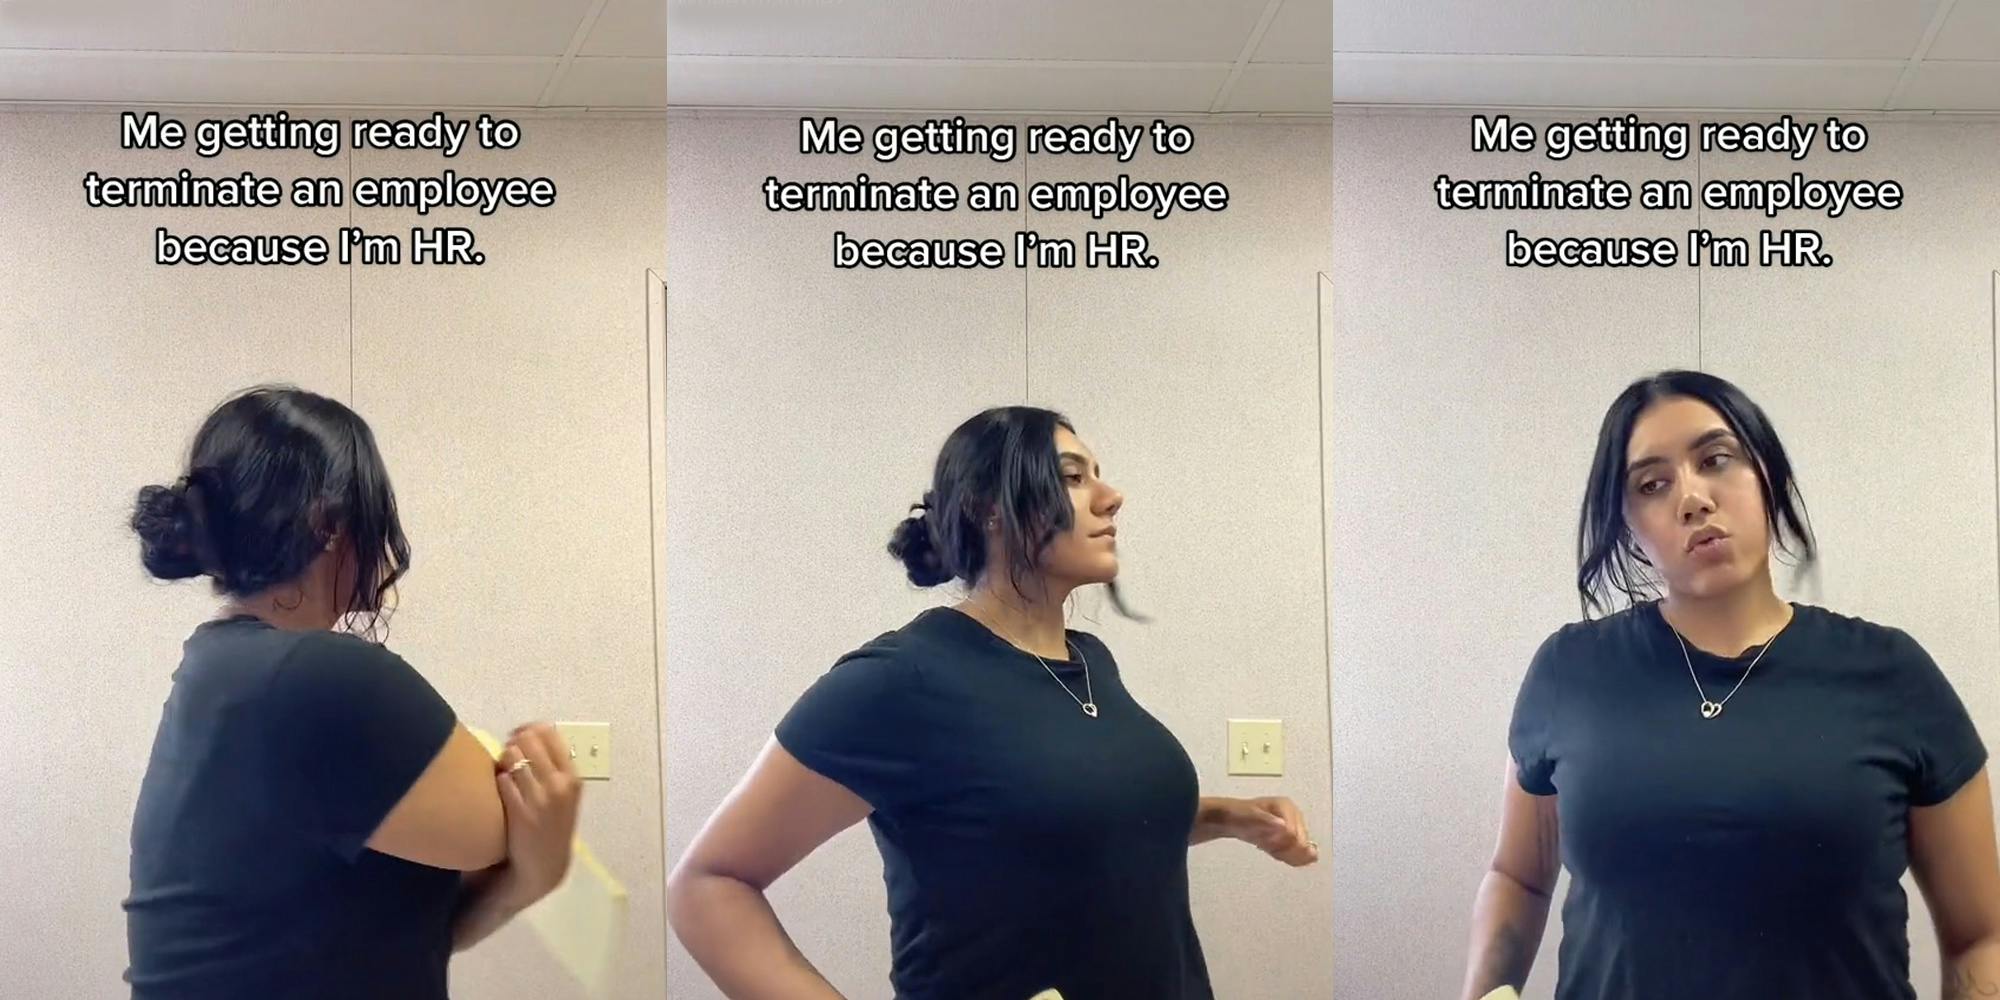 woman stretching arm to side caption "Me getting ready to terminate an employee because I'm HR." (l) woman in motion stretching and turning left caption "Me getting ready to terminate an employee because I'm HR." (c) woman arms back after stretching caption "Me getting ready to terminate an employee because I'm HR." (r)